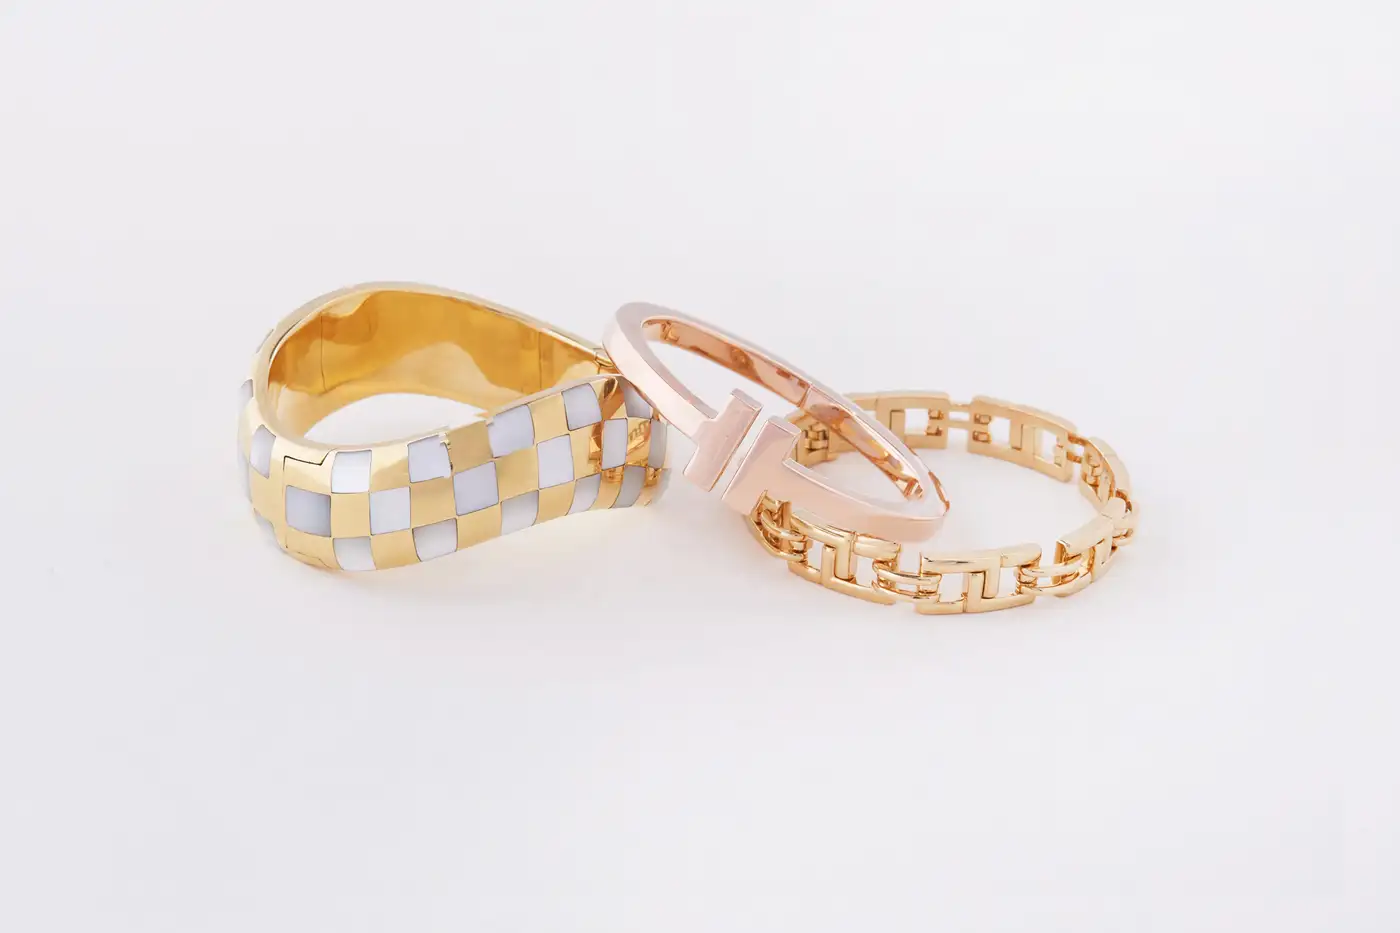 Angela-Cummings-Gold-and-Mother-or-Pearl-Bangle-2.webp